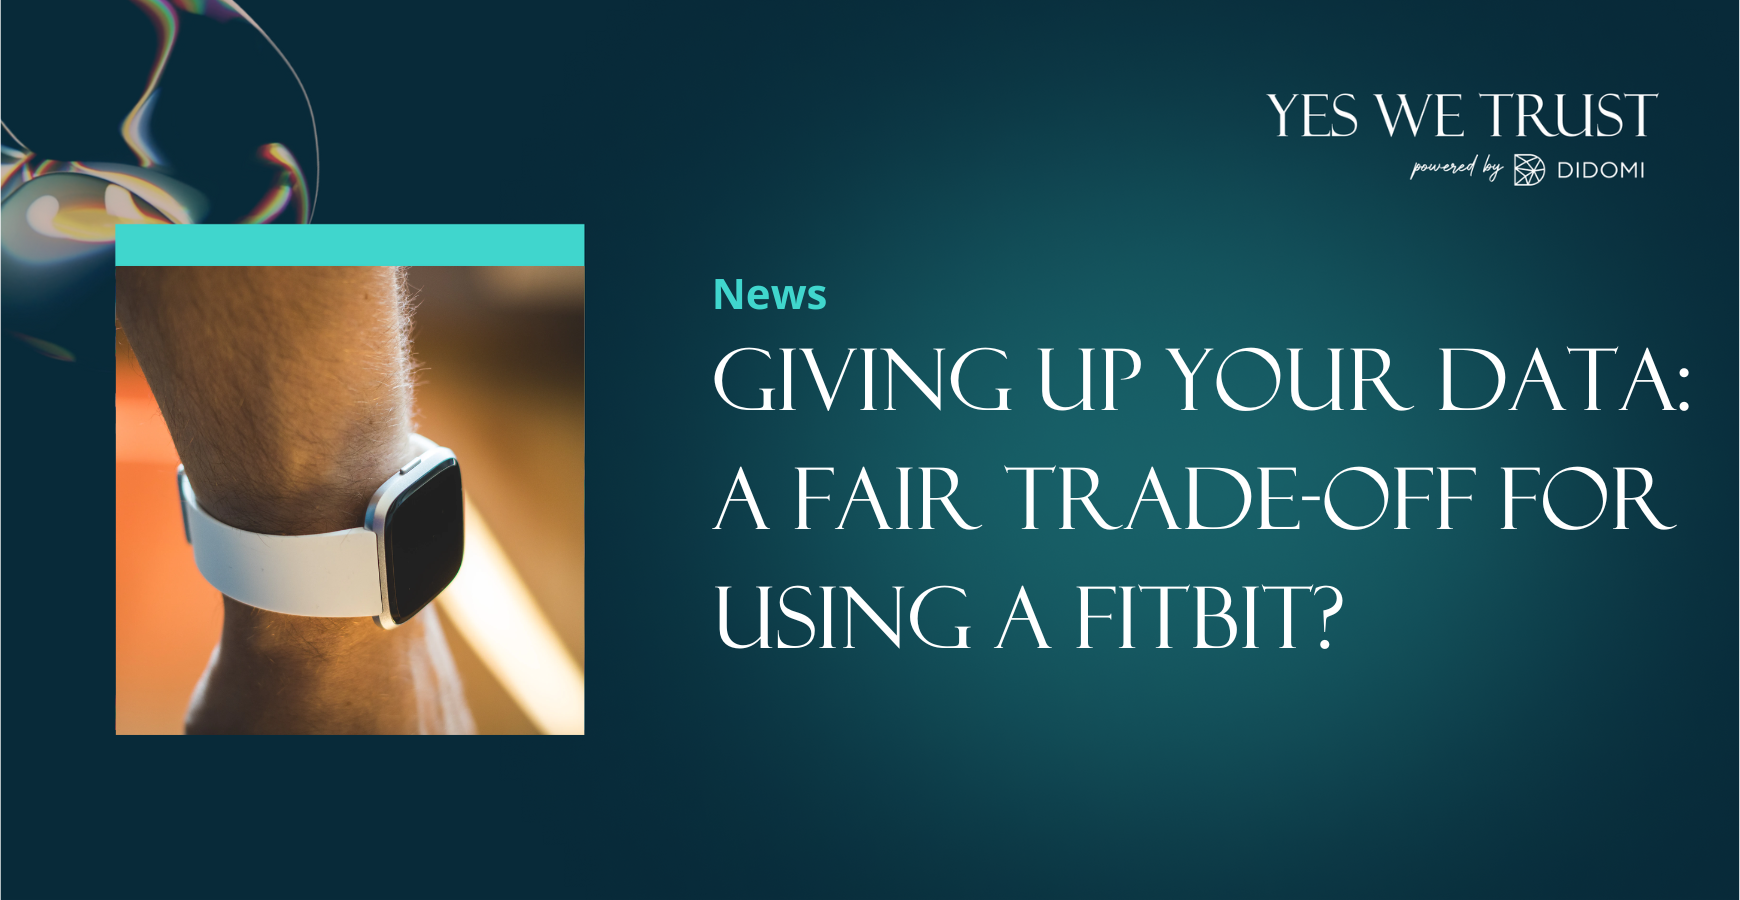 Expect to give up your data as a trade-off for using a Fitbit